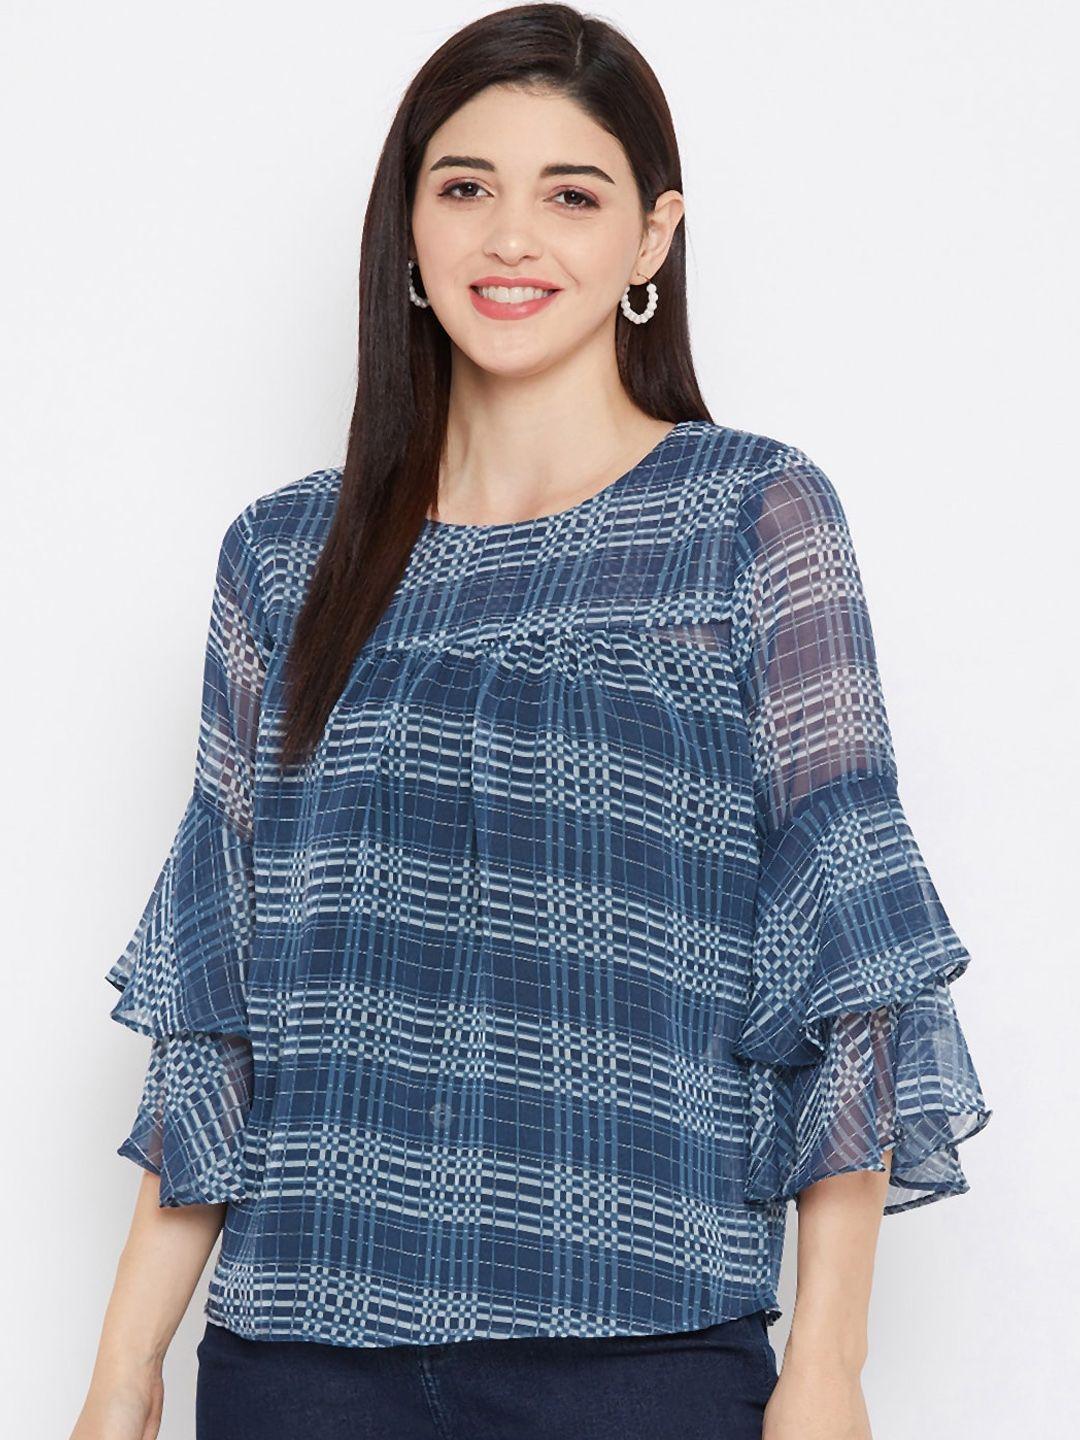 purys navy blue & white checked bell sleeves georgette regular top